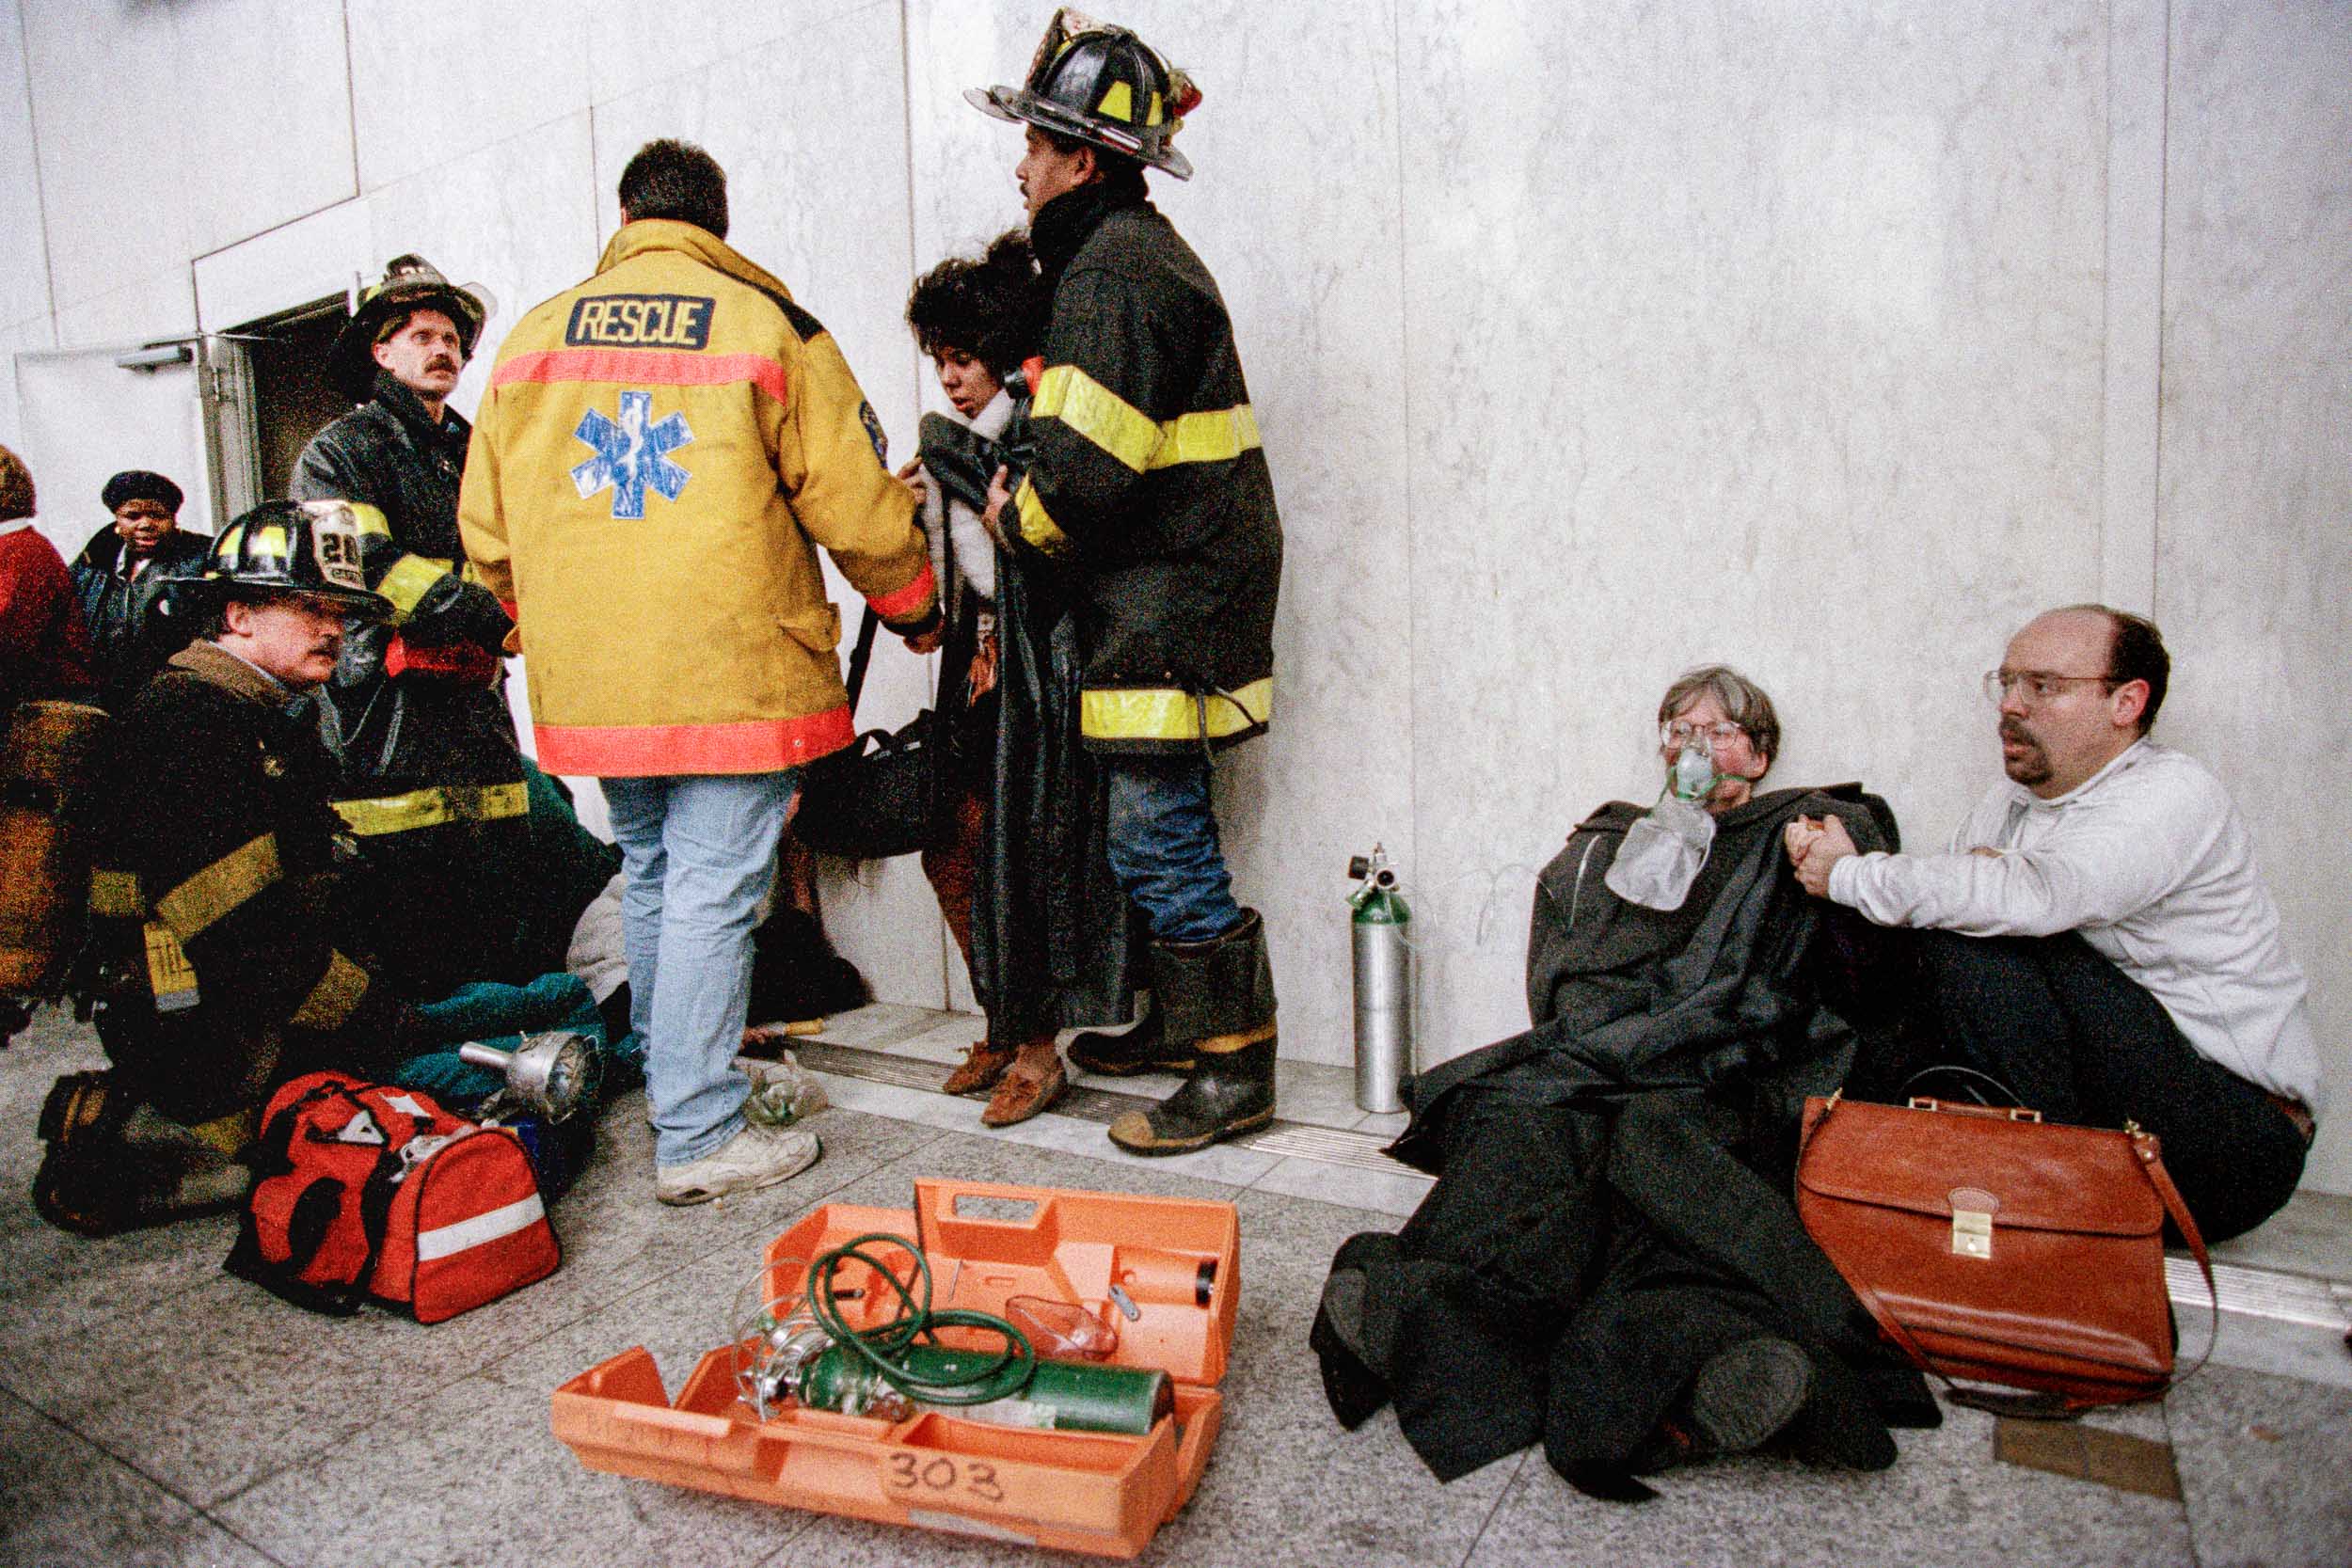 Office workers receiving medical treatment in the lobby of the World Trade Center, NY, 1993